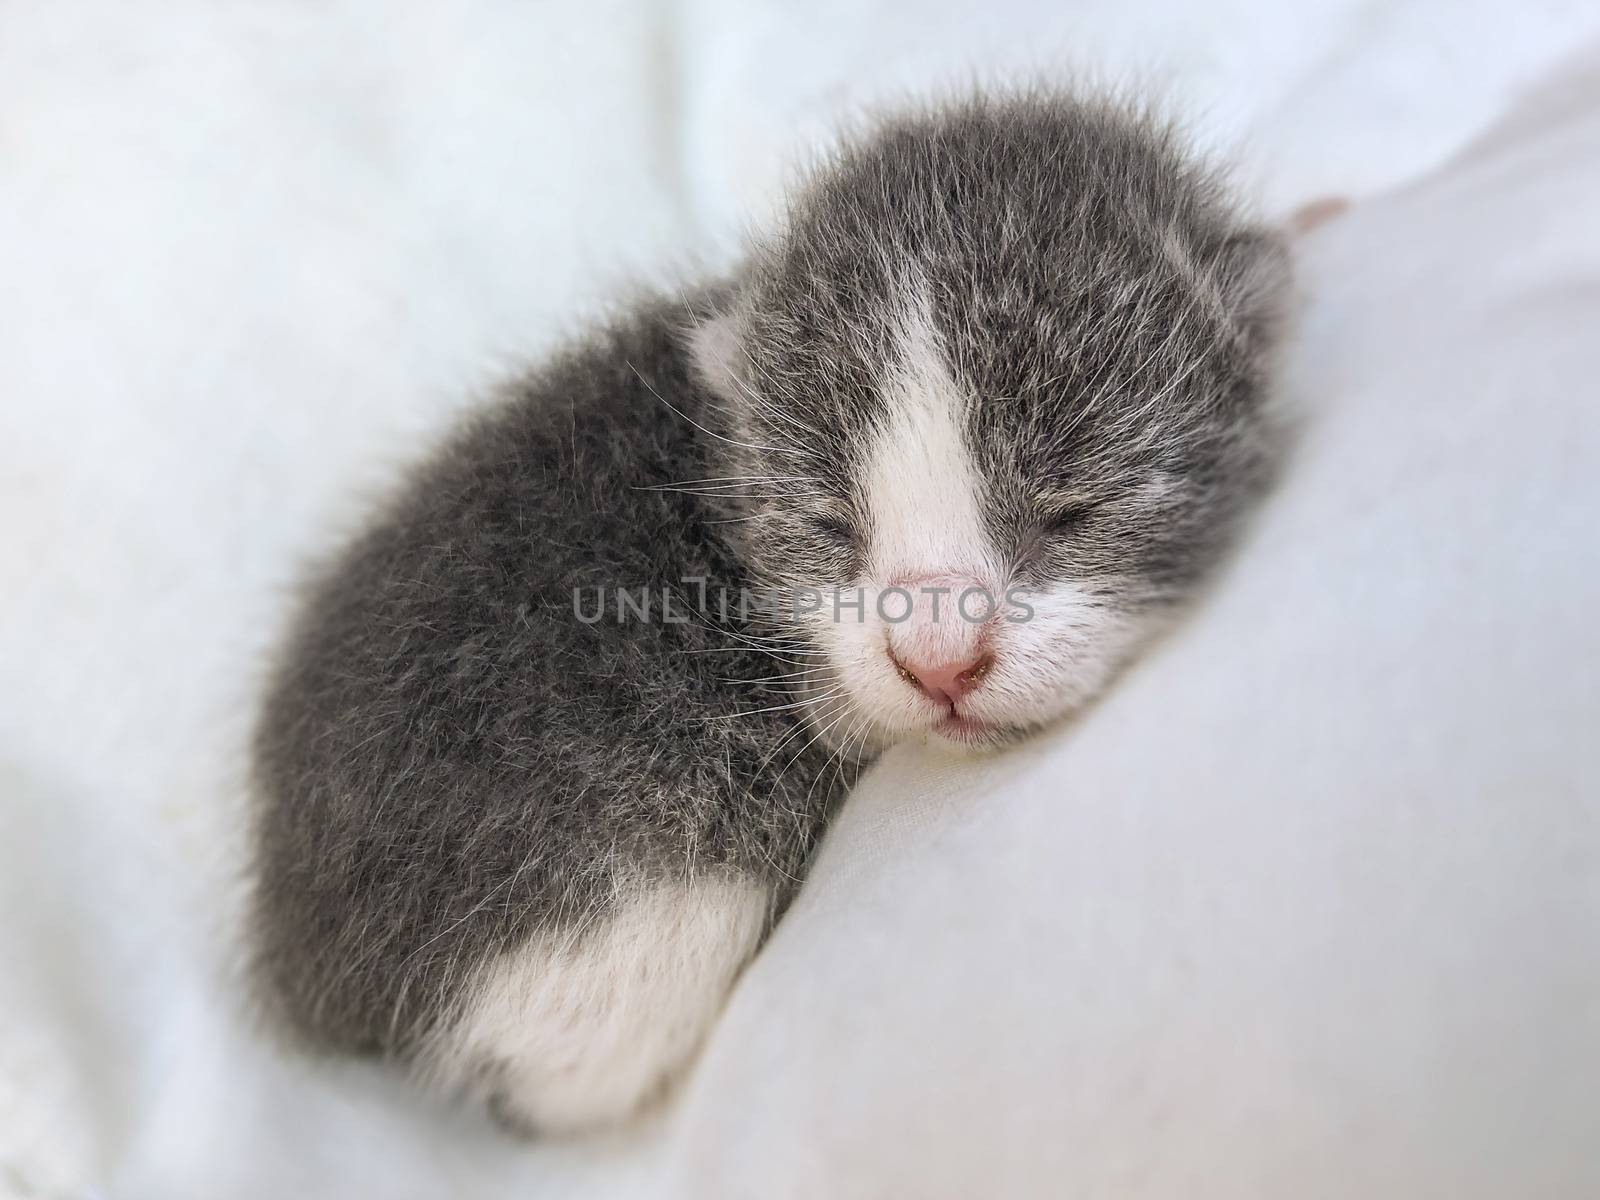 a cut newborn kitten sleeping on a white pillow with copy space